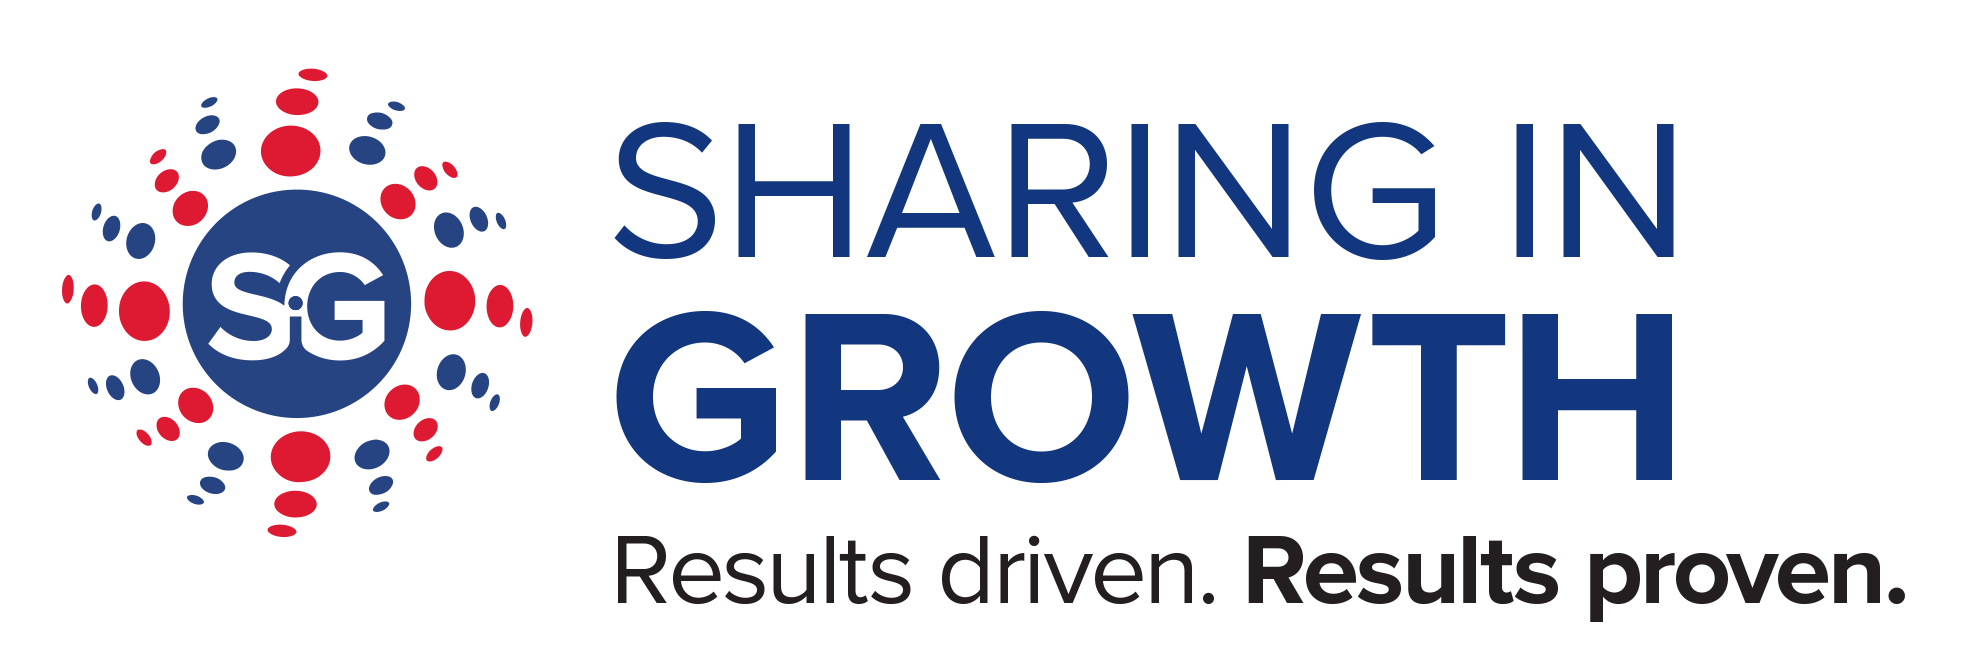 Sharing in Growth Logo